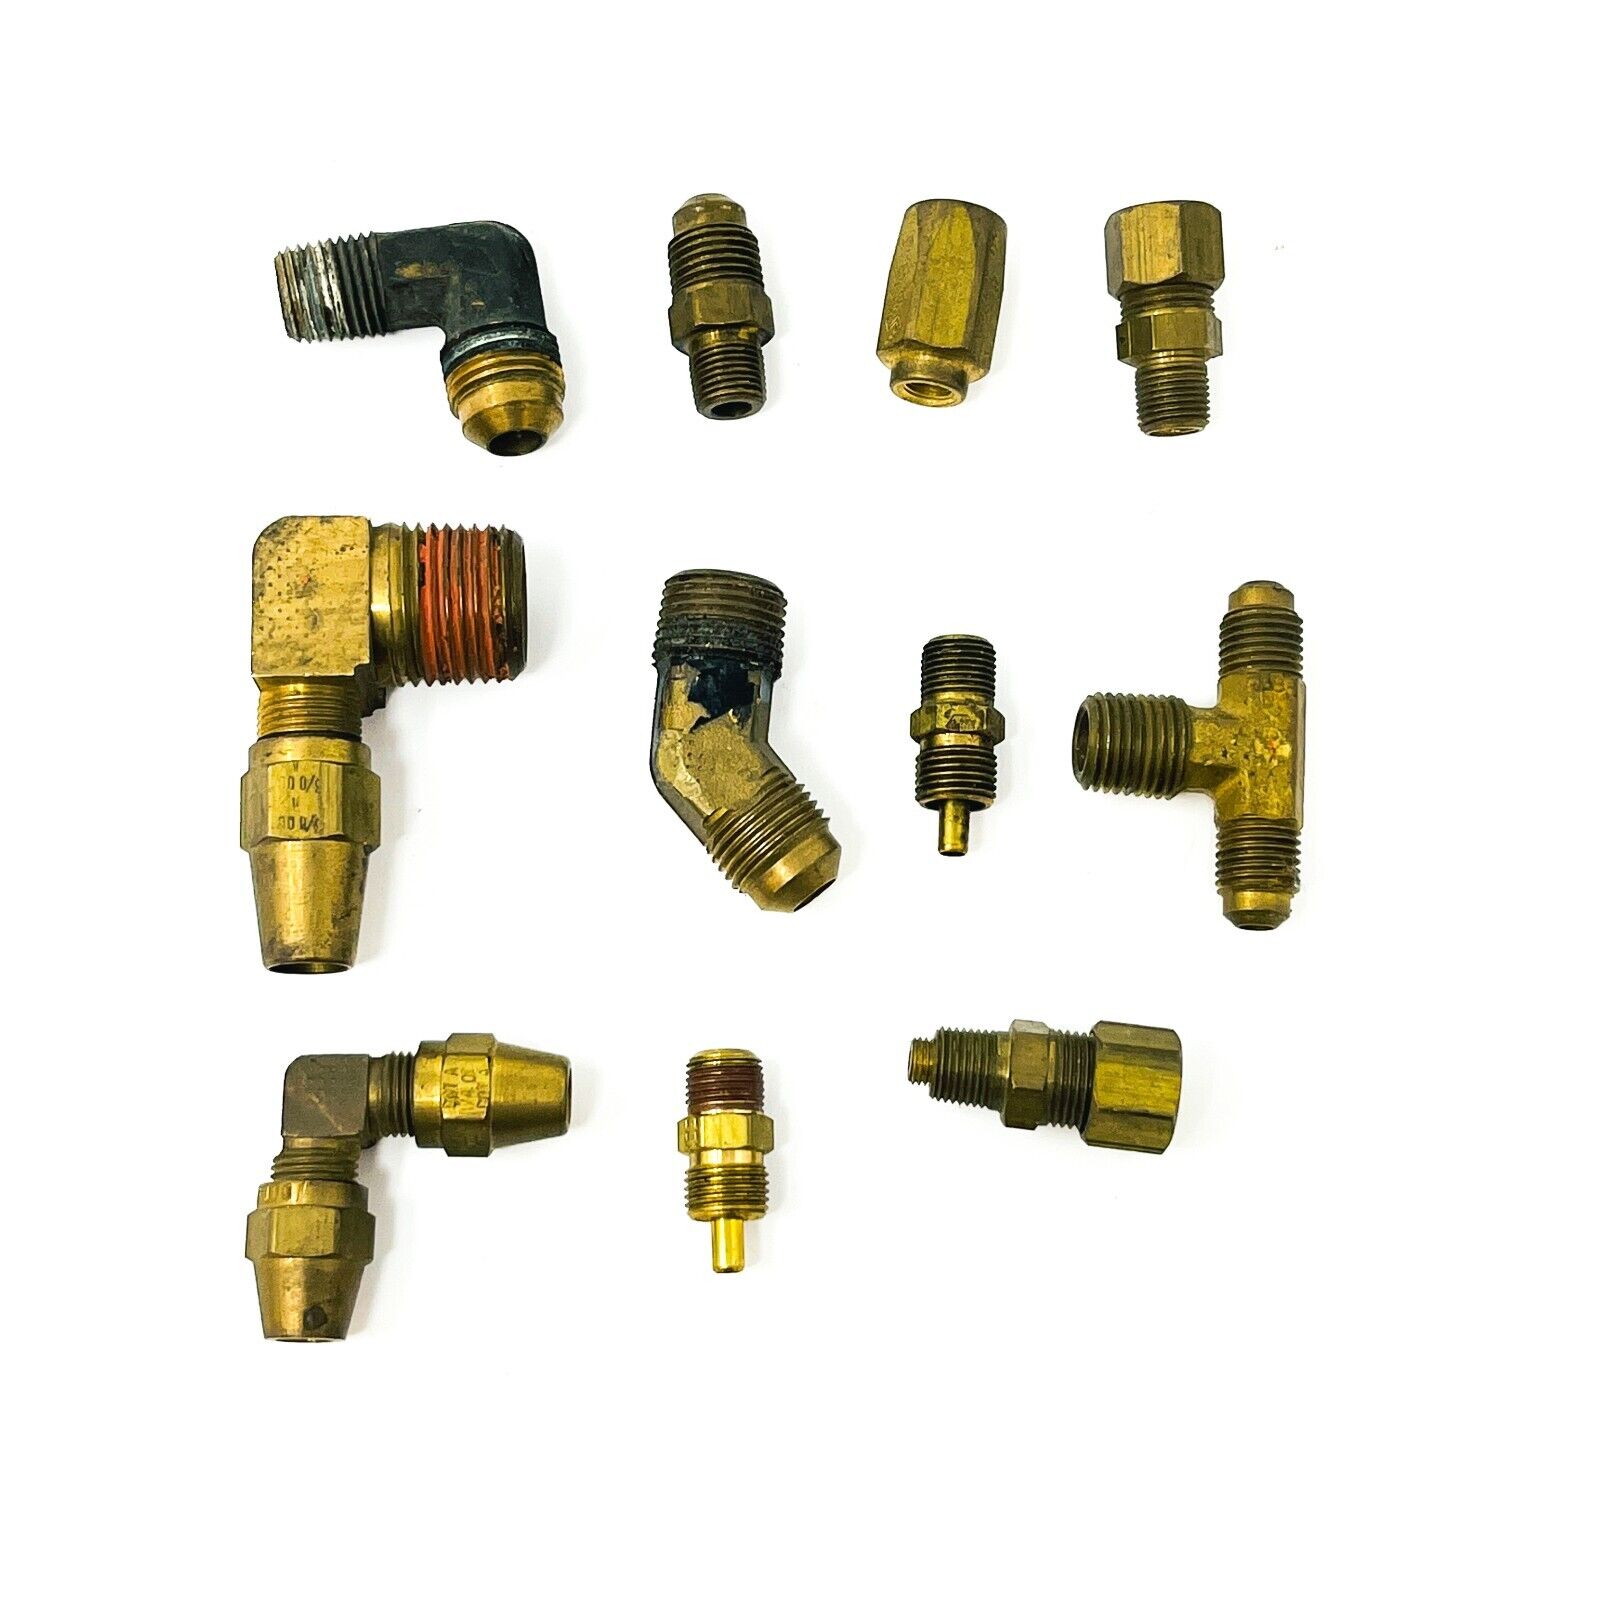 11 pcs Set of Brass Fittings Elbow Tee Straight 3/8, 1/4, 3/16 inch Assorted